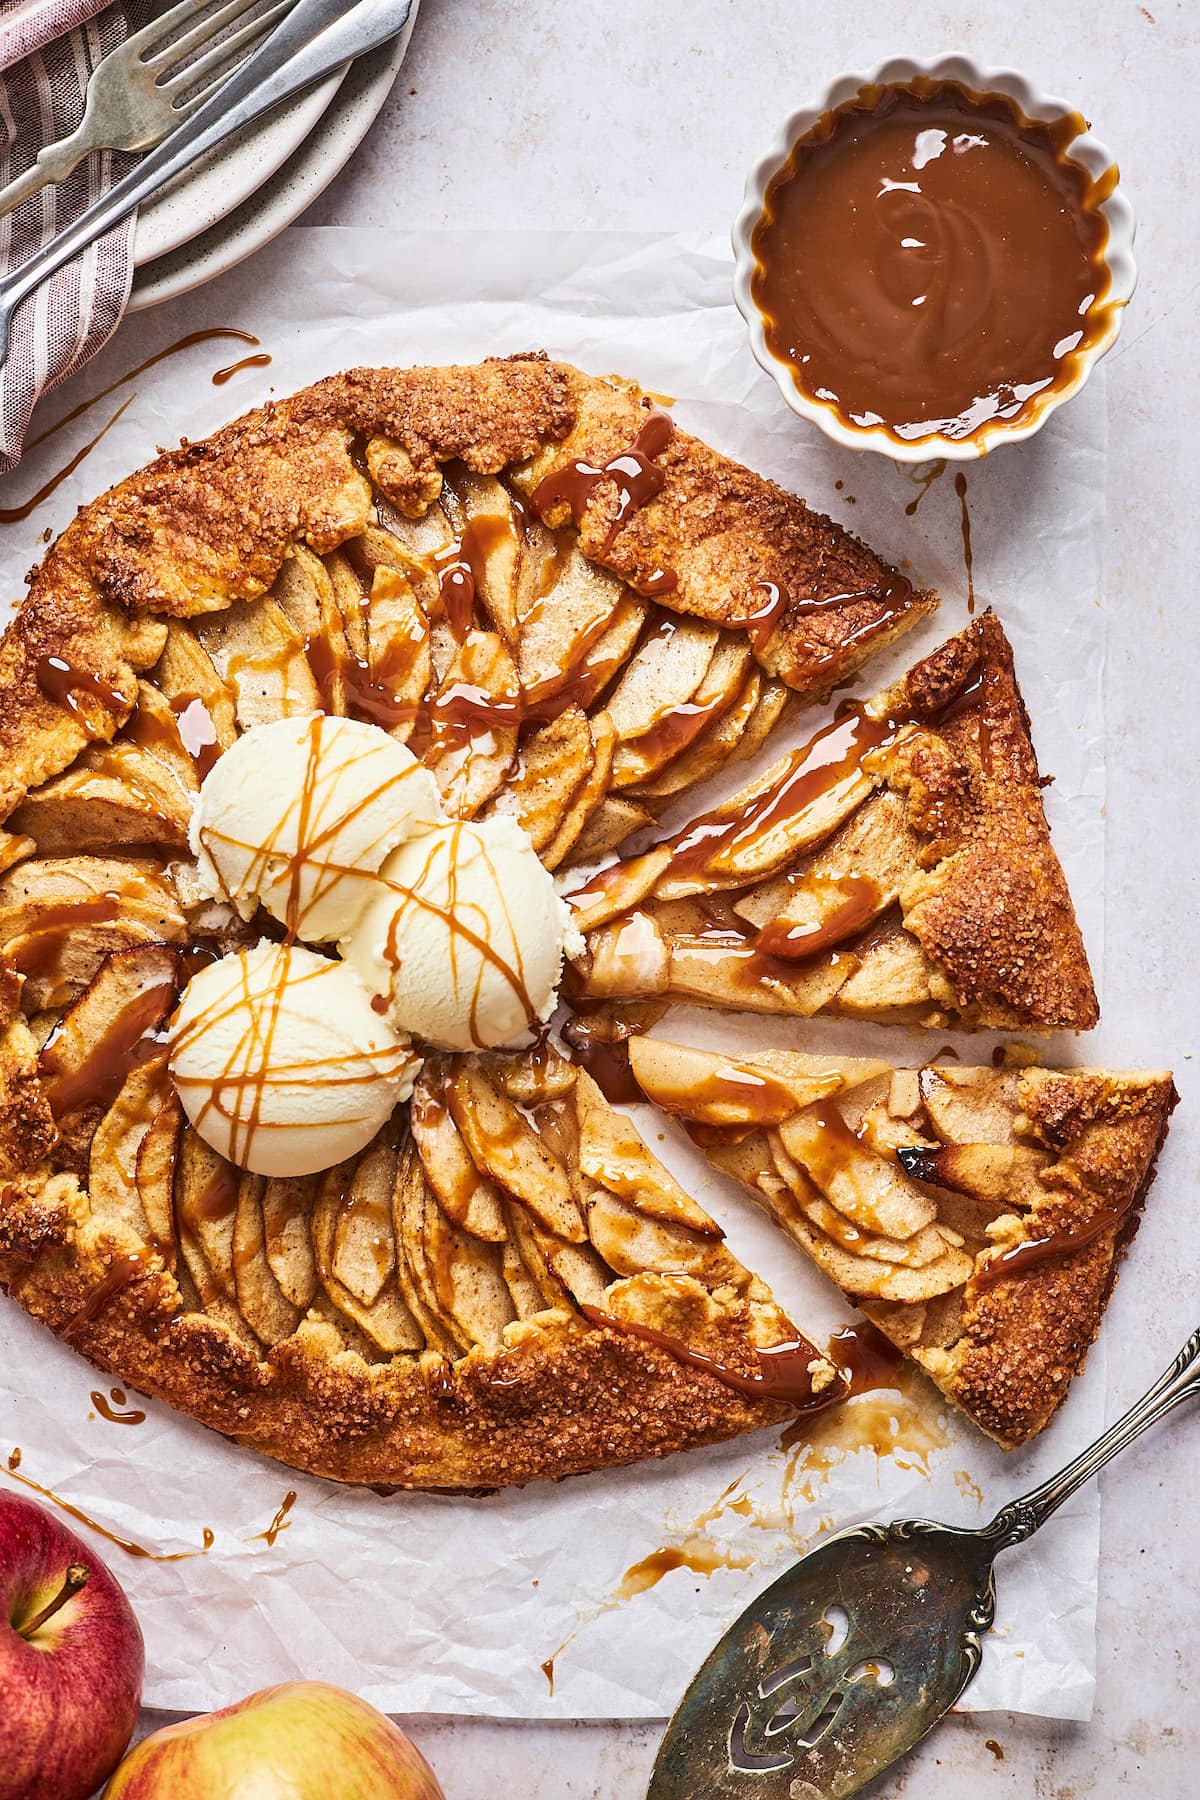 Best Apple Galette Recipe - How to Make Apple Galette